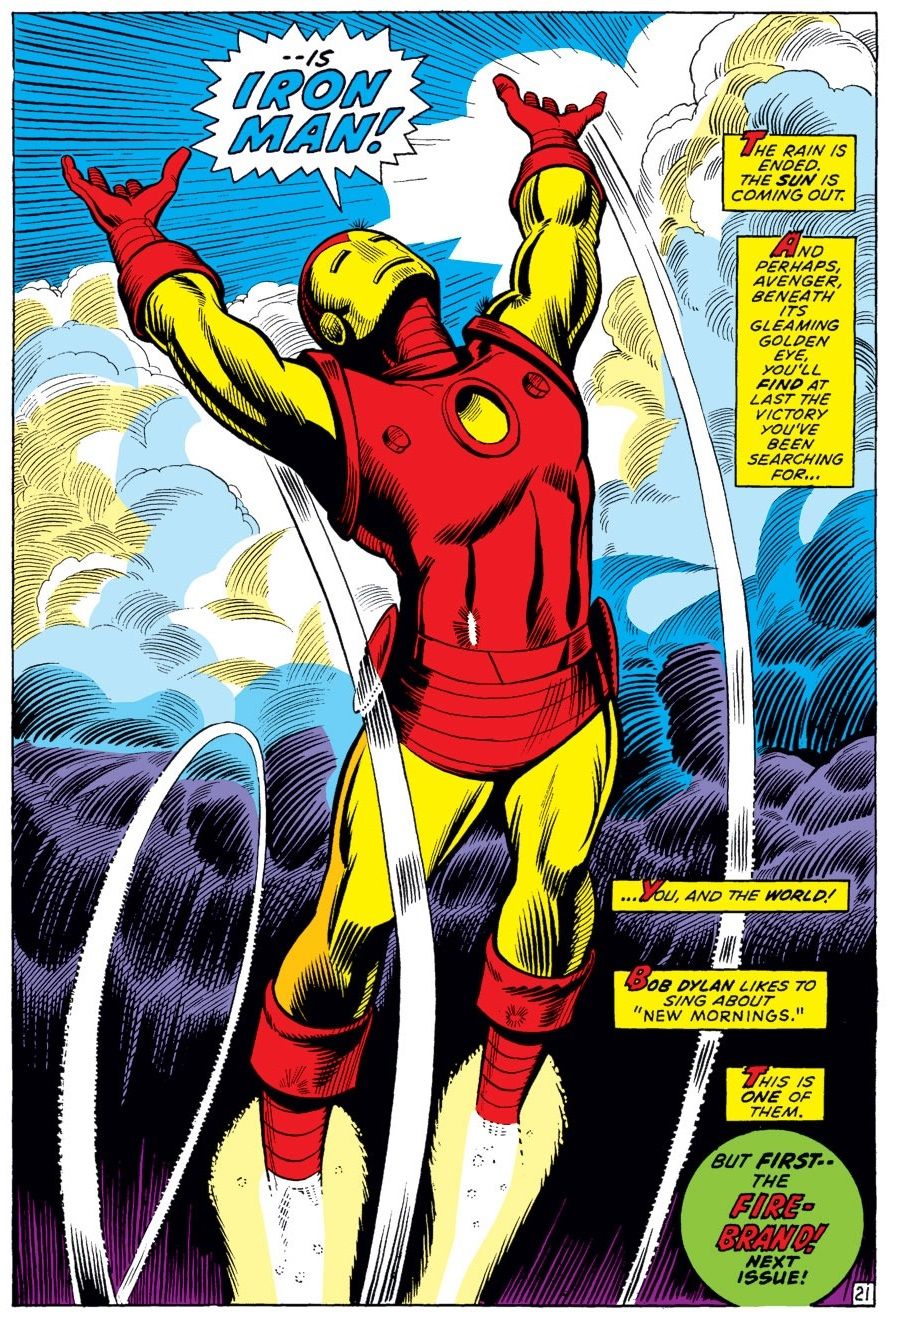 Iron Man references the Bob Dylan song, "New Morning"